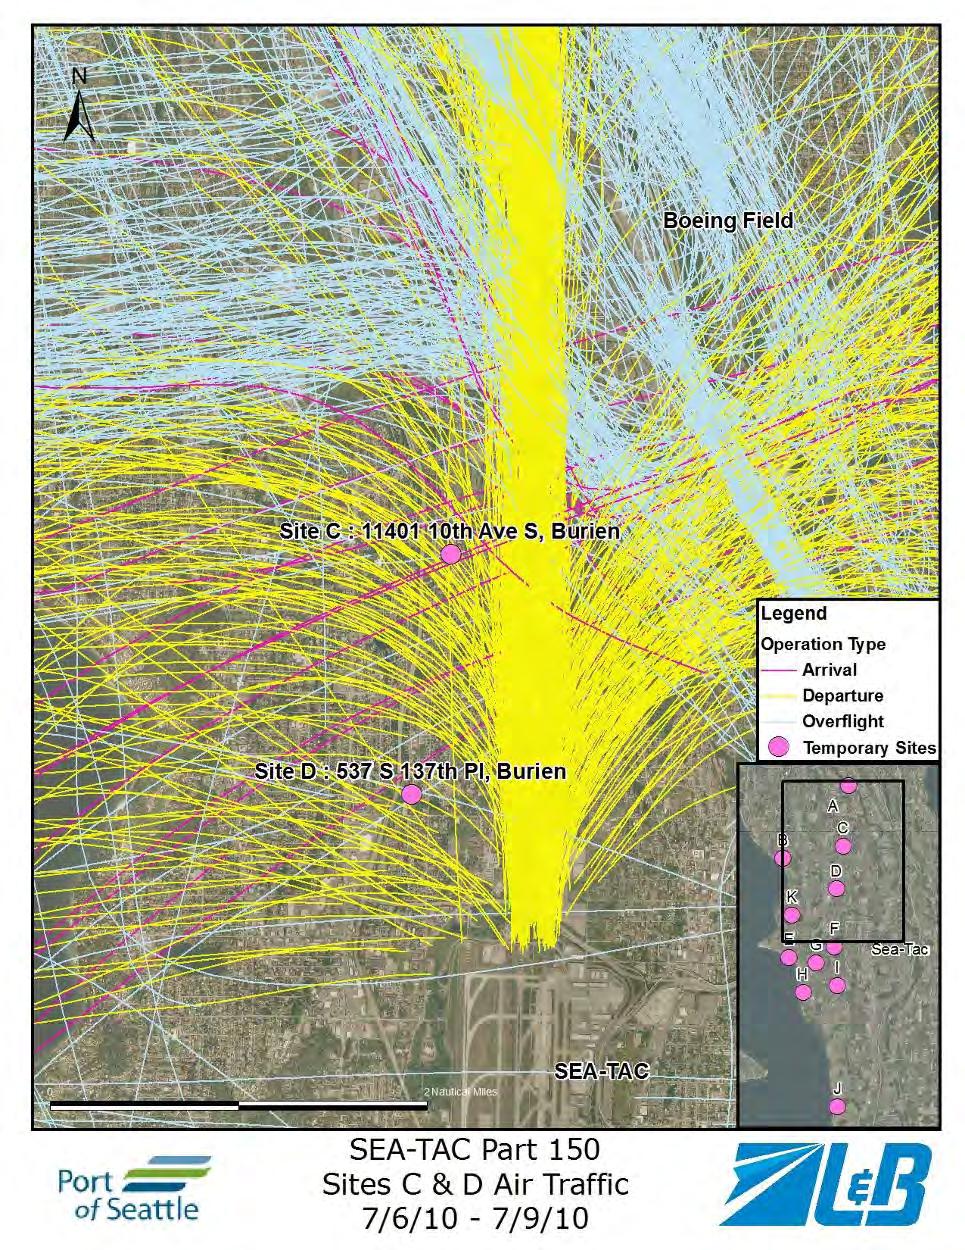 10 Air Traffic Map - Noise events were matched with flights using the airport noise